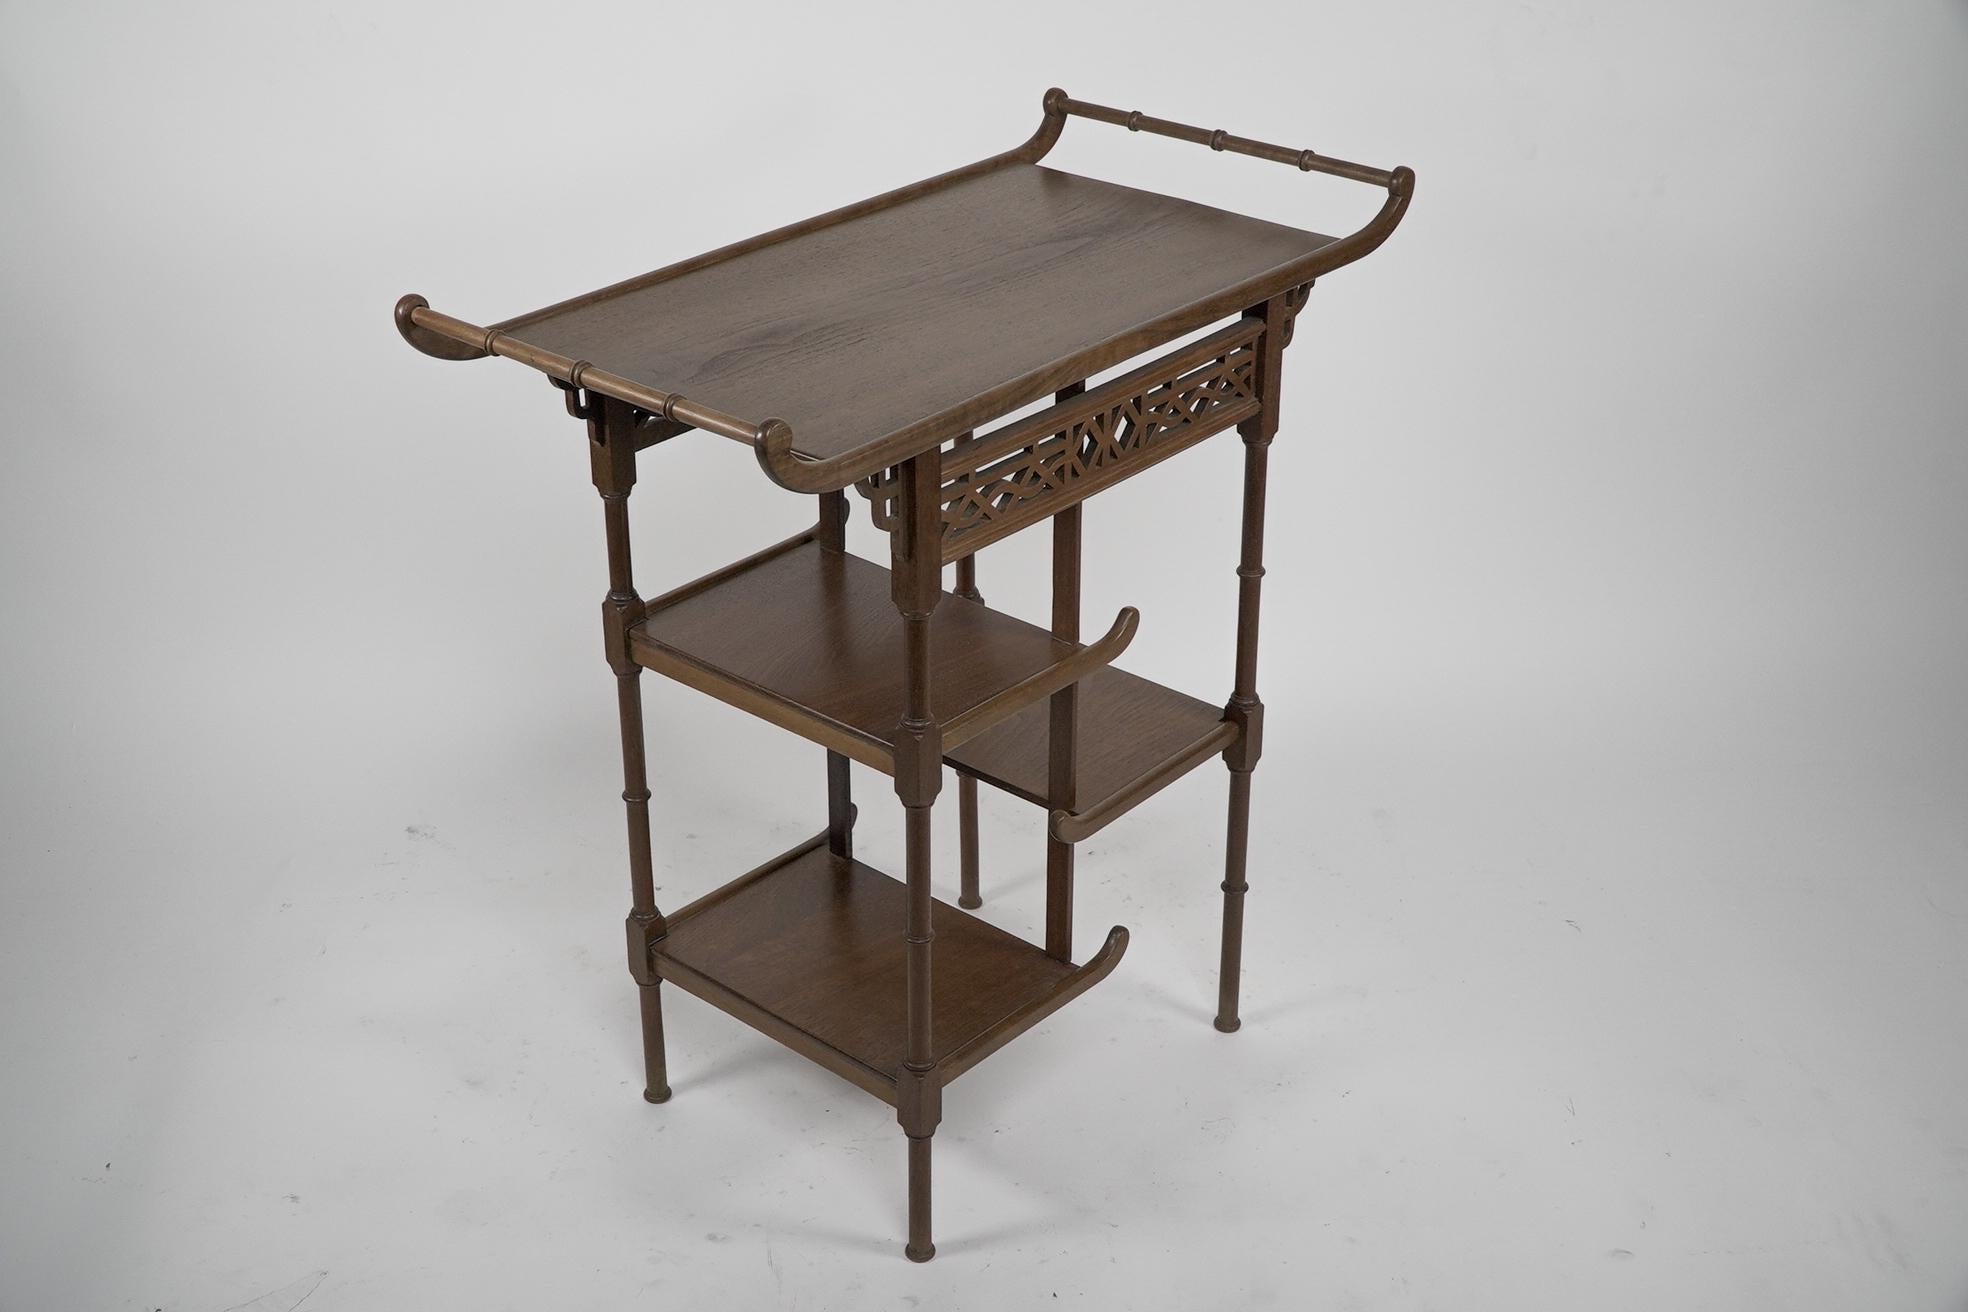 English An Anglo-Japanese beech wood side table with fretwork &pagoda style turned rails For Sale